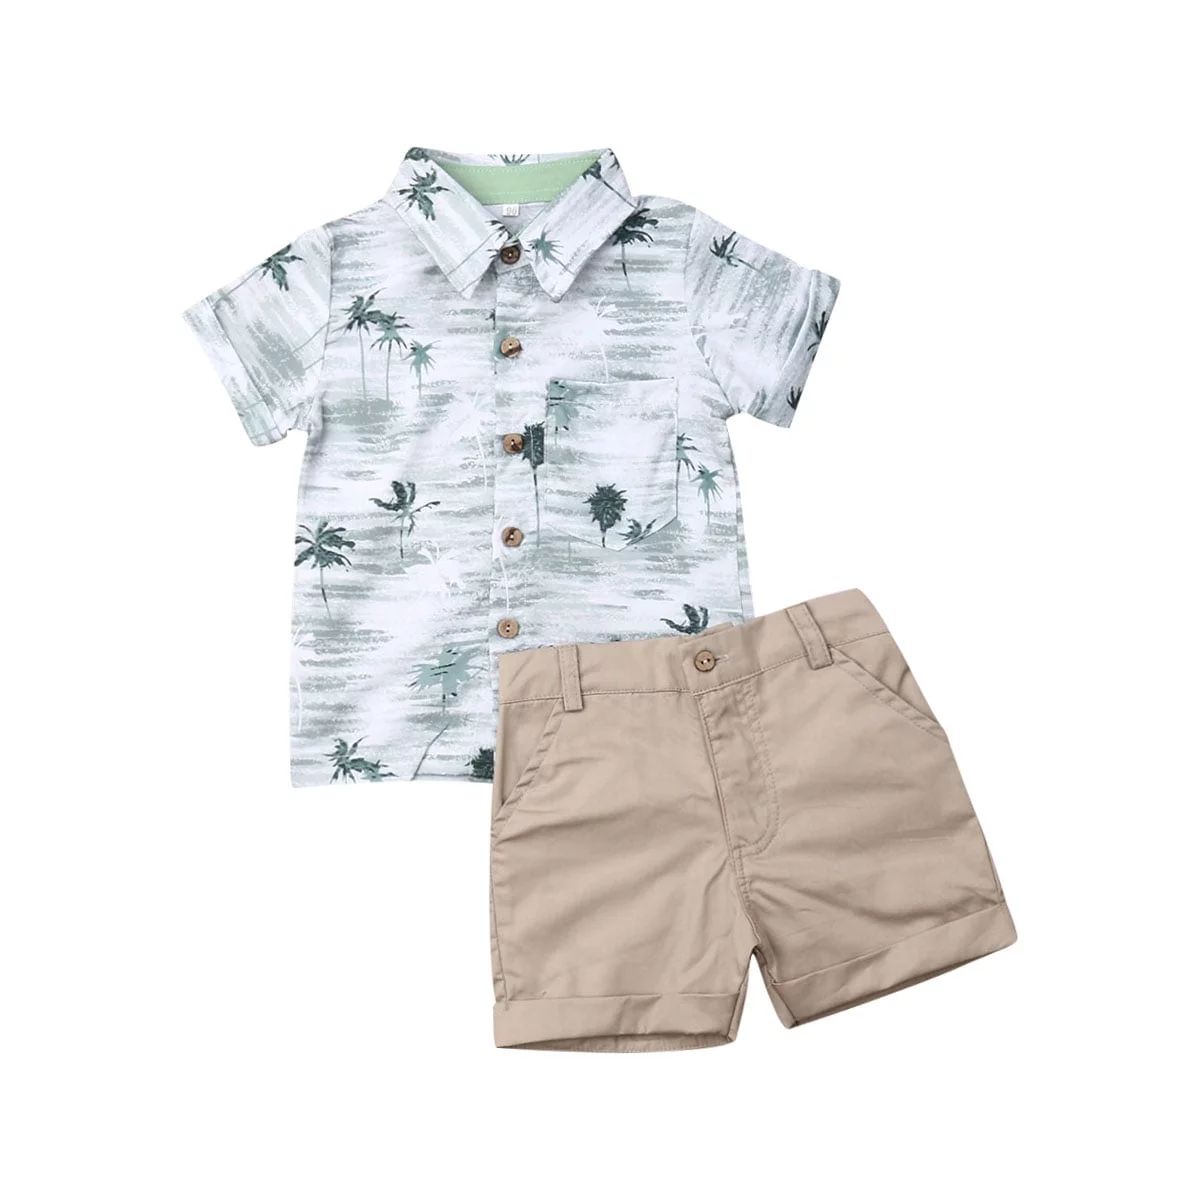 TheFound Toddler Baby Boy Short Sleeve Button Down Shirt Shorts Set 2T 3T 4T 5T 6T Outfits Summer... | Walmart (US)